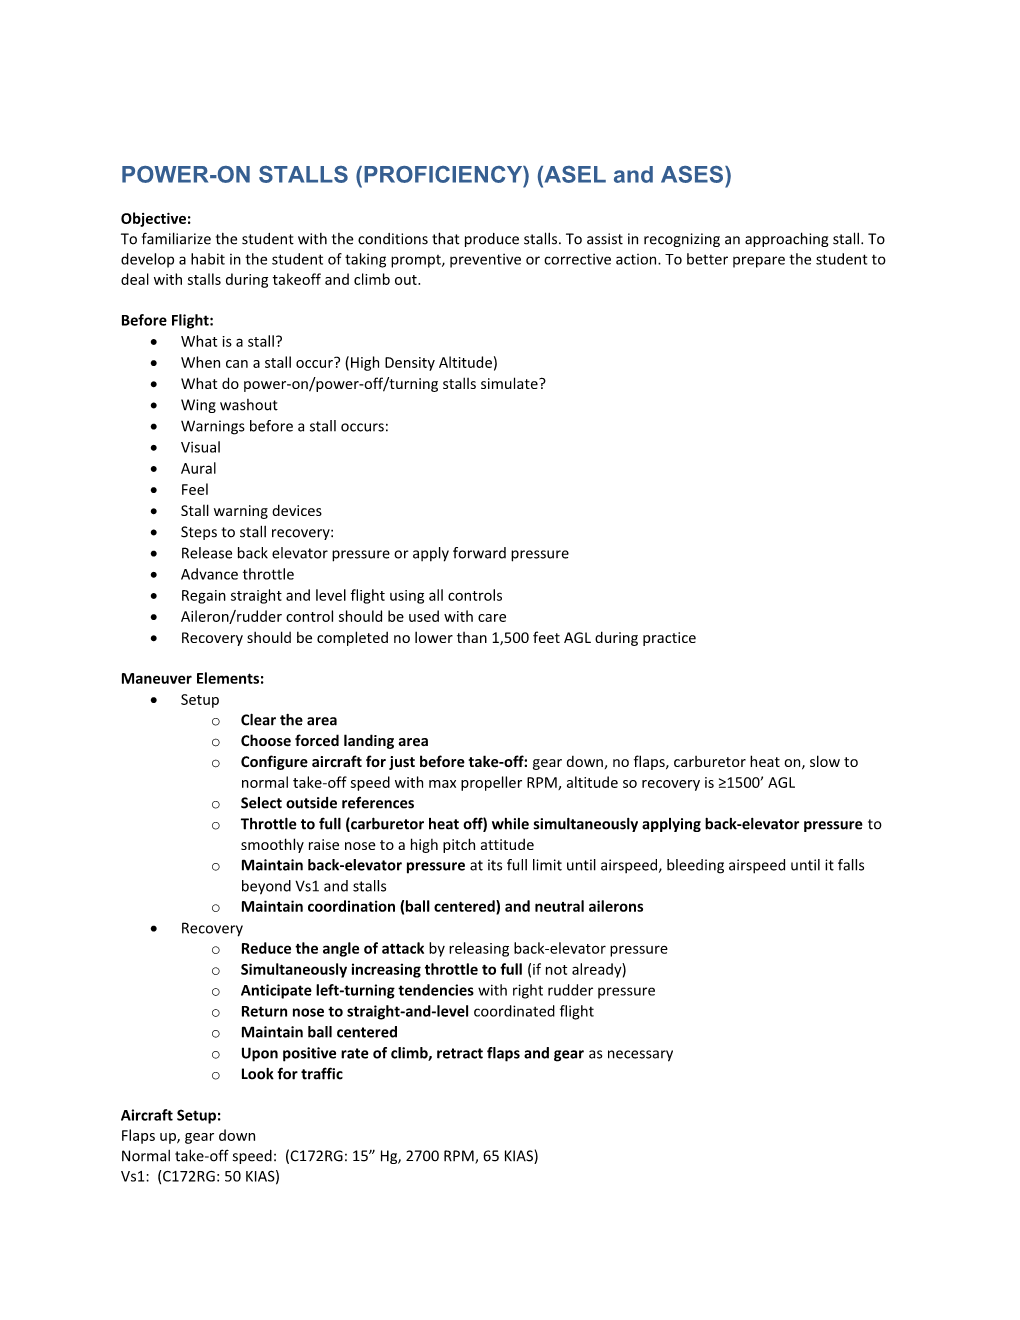 POWER-ON STALLS (PROFICIENCY) (ASEL and ASES)